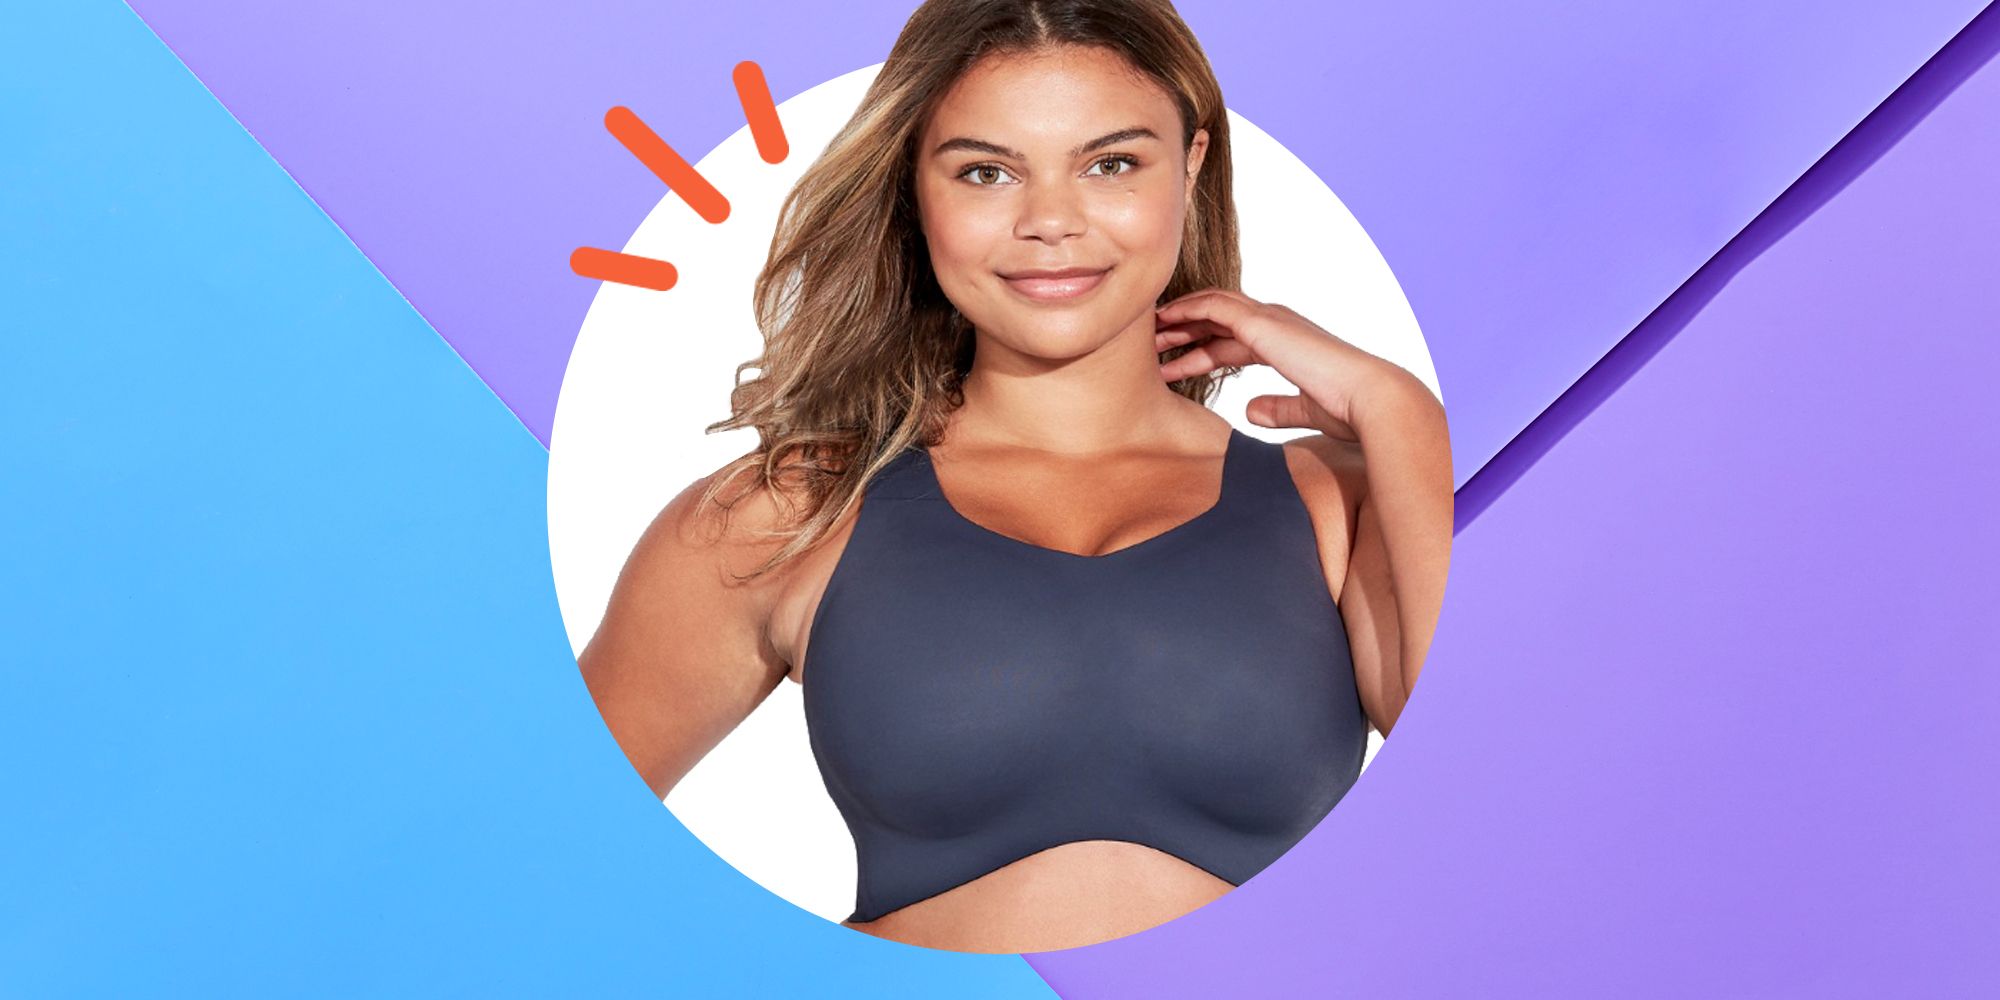 For all my busty ladies! Sports bra options from @Oner Active. Gone ar